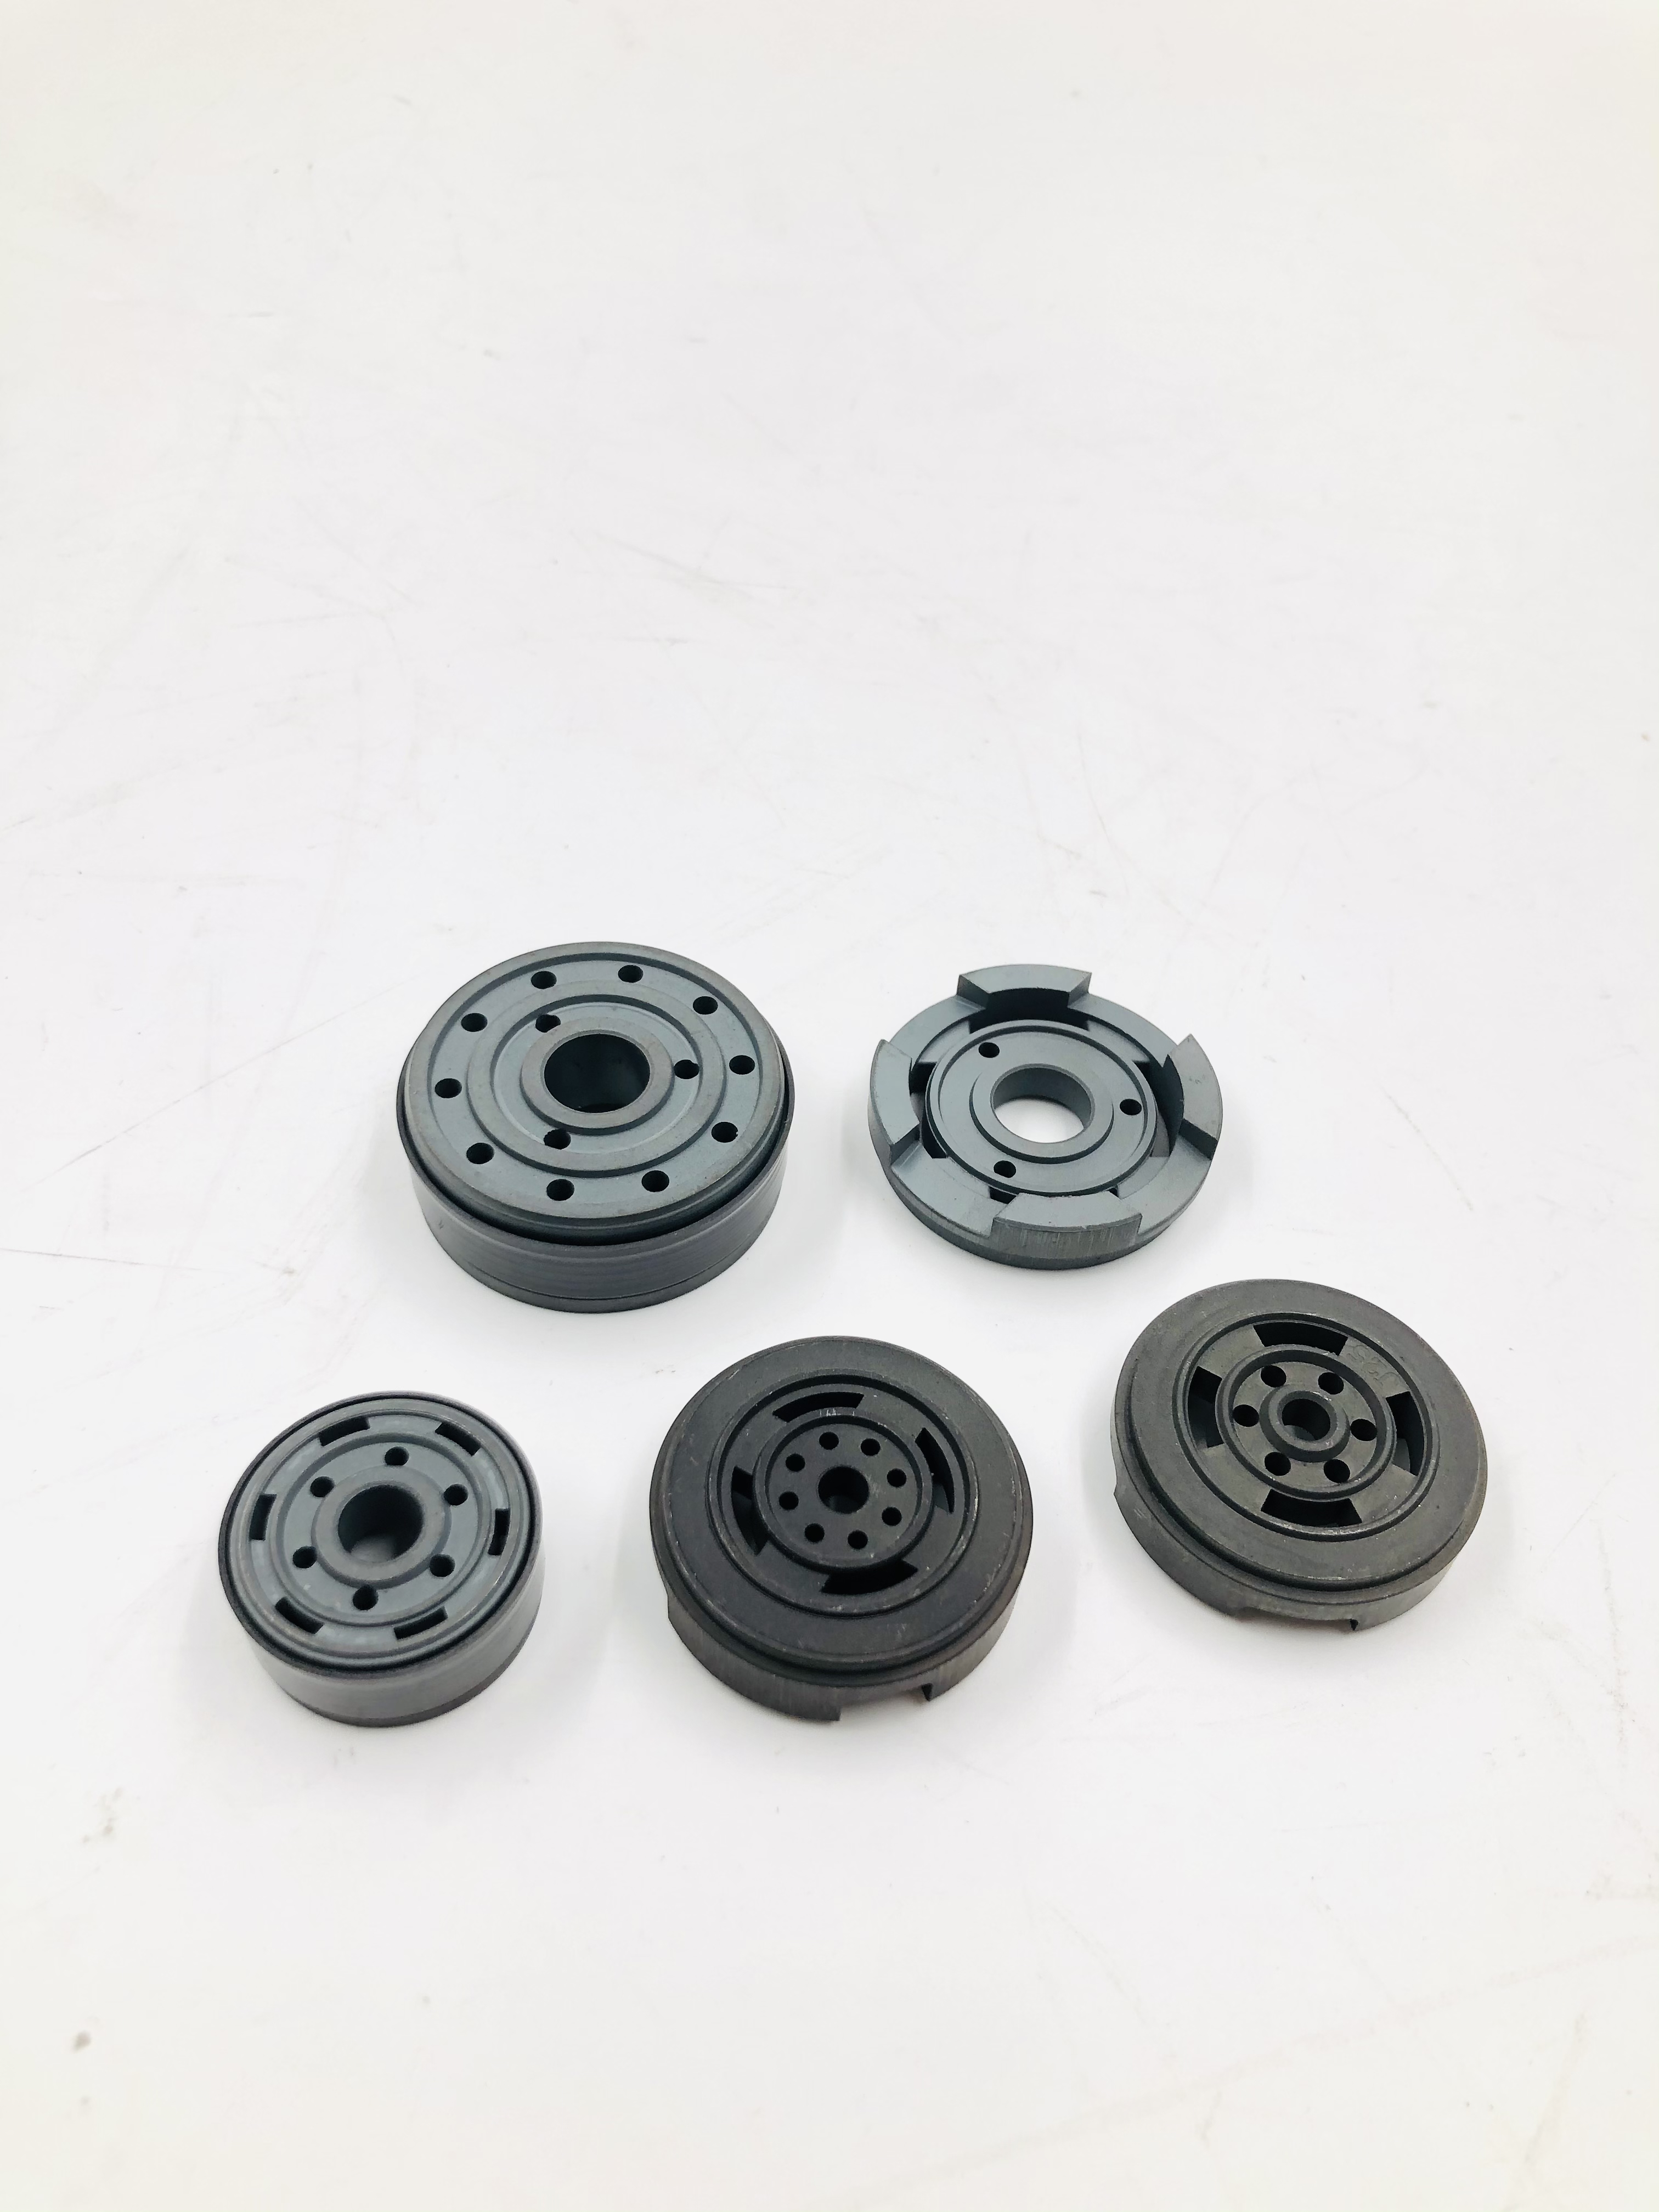 Shock Absorber Components Manufacture Customized Fe-C-Cu Powder Metal compression valve cases